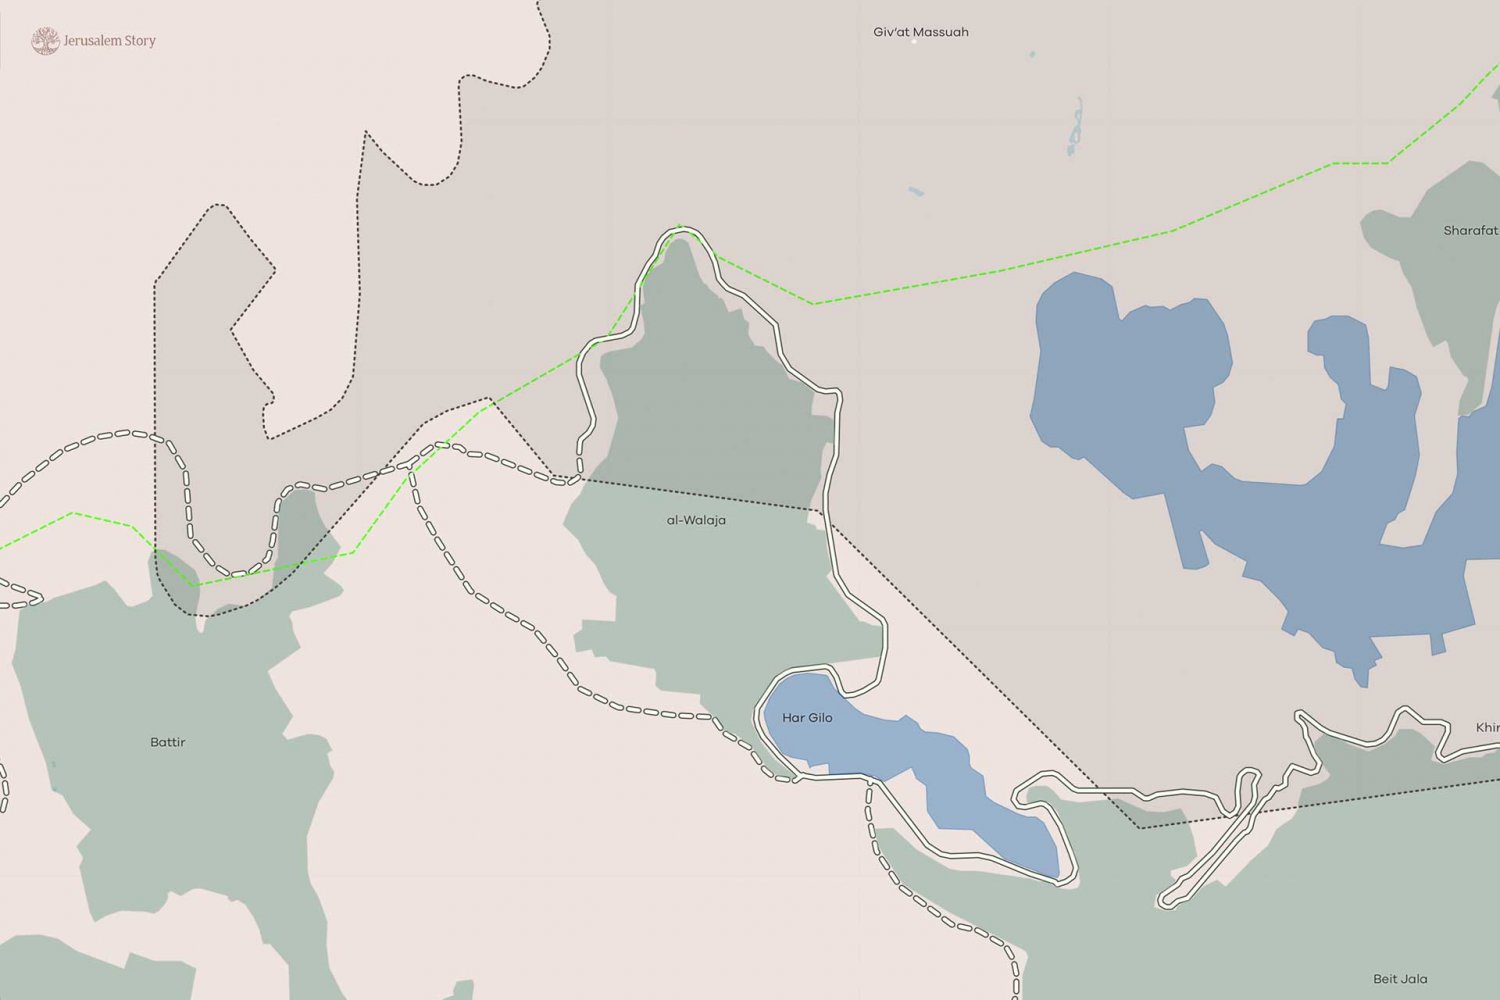 A close-up of the map of the area around the Palestinian village of al-Walaja